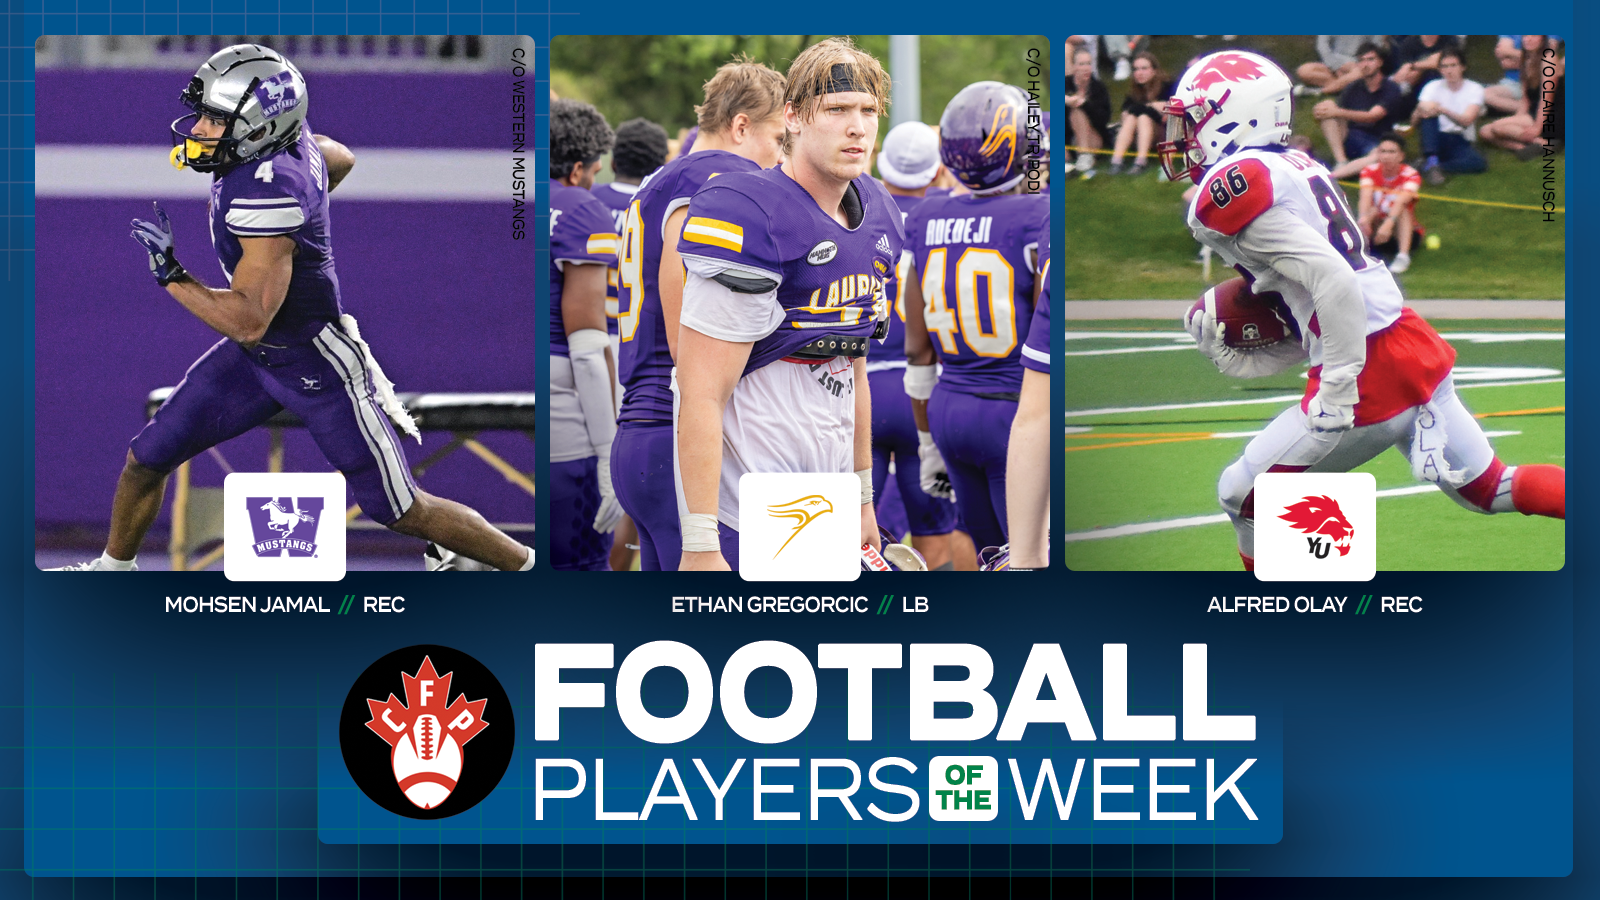 Graphic on predominantly blue background featuring action photos of Mohsen Jamal, Ethan Gregorcic, and Alfred Olay with their name and school logos placed beneath their respective photos, along with the Canadian Football Perspective logo and white text that reads 'Football Players of the Week' in the lower third